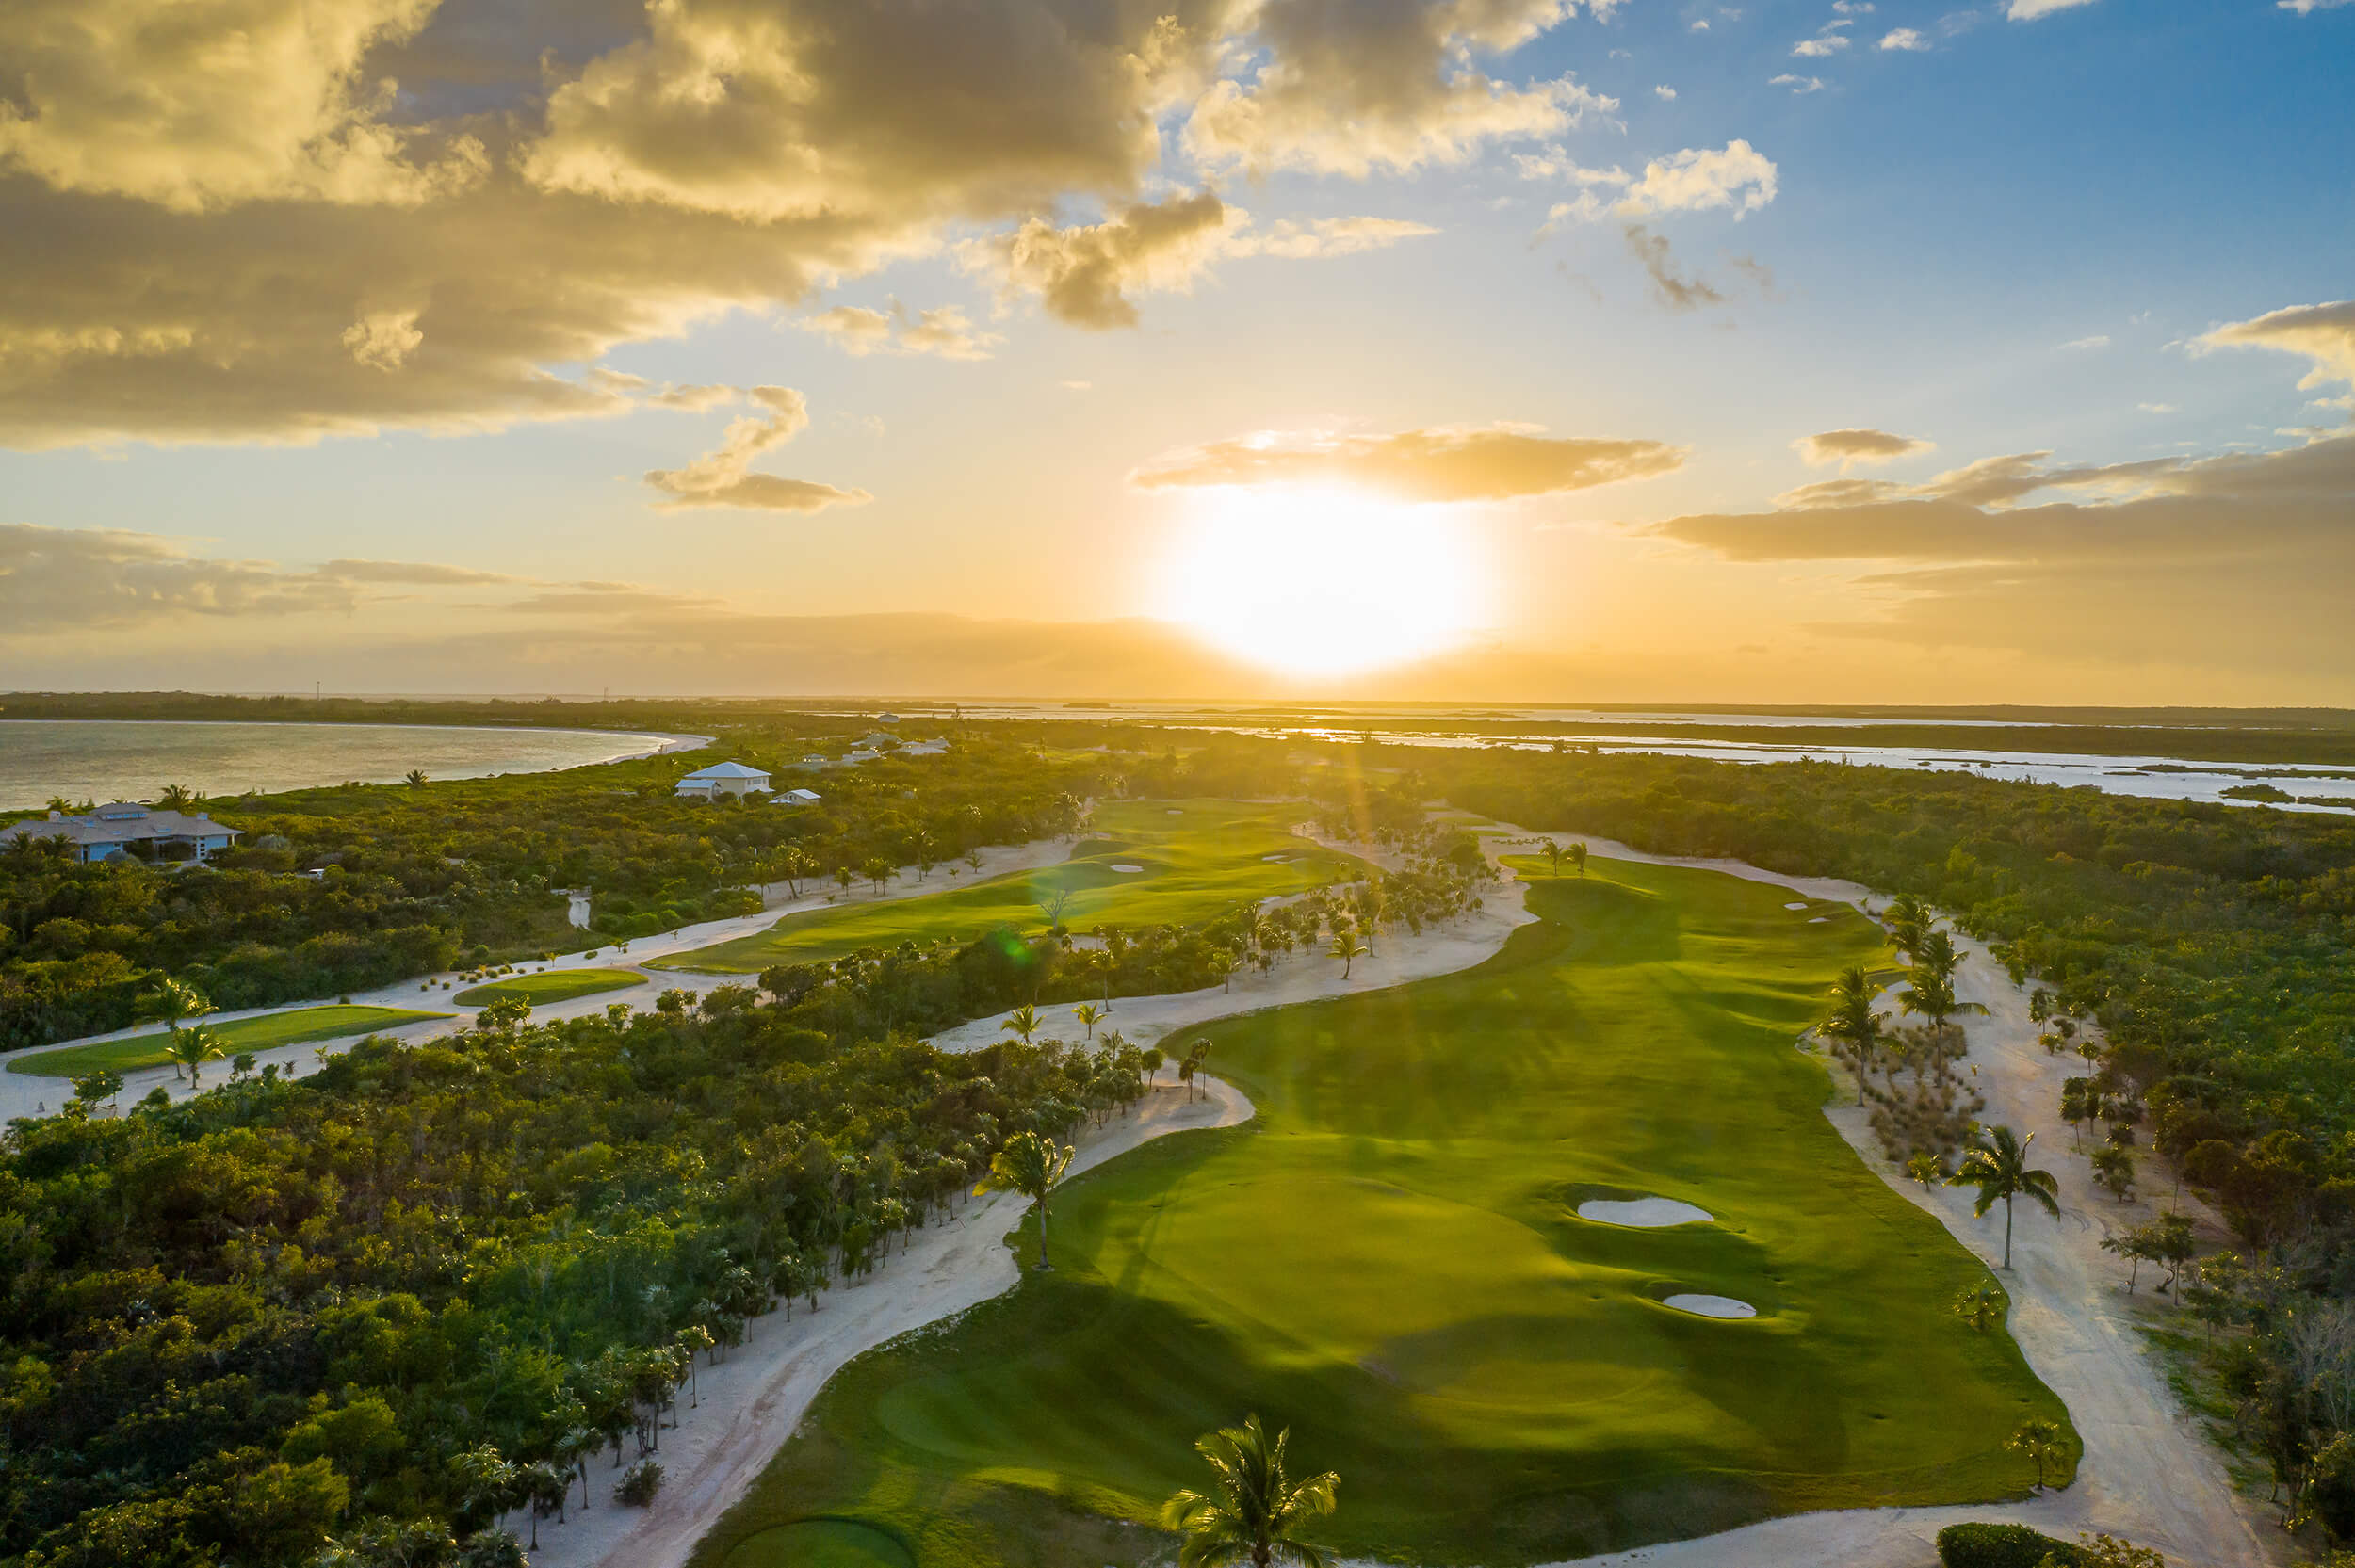 Sunset at The Abaco Club